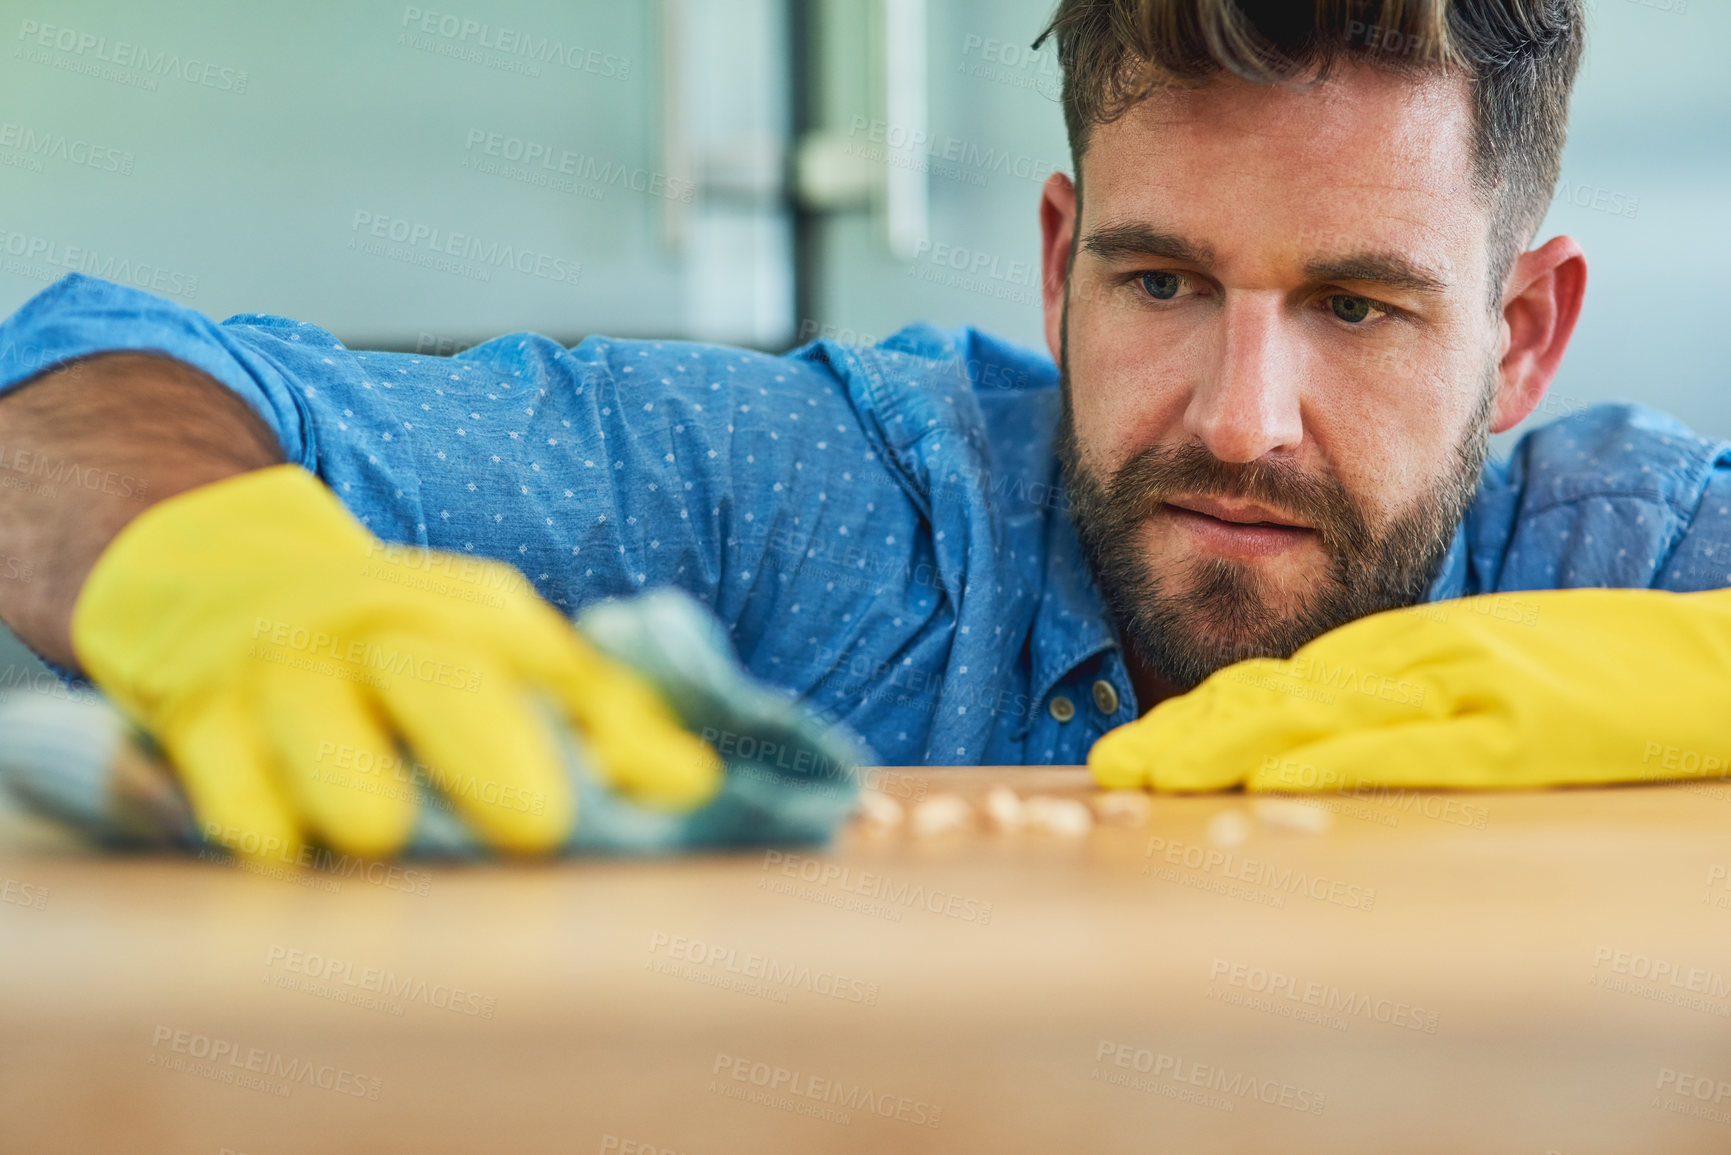 Buy stock photo Shot of a man wearing rubber gloves while wiping a table at home